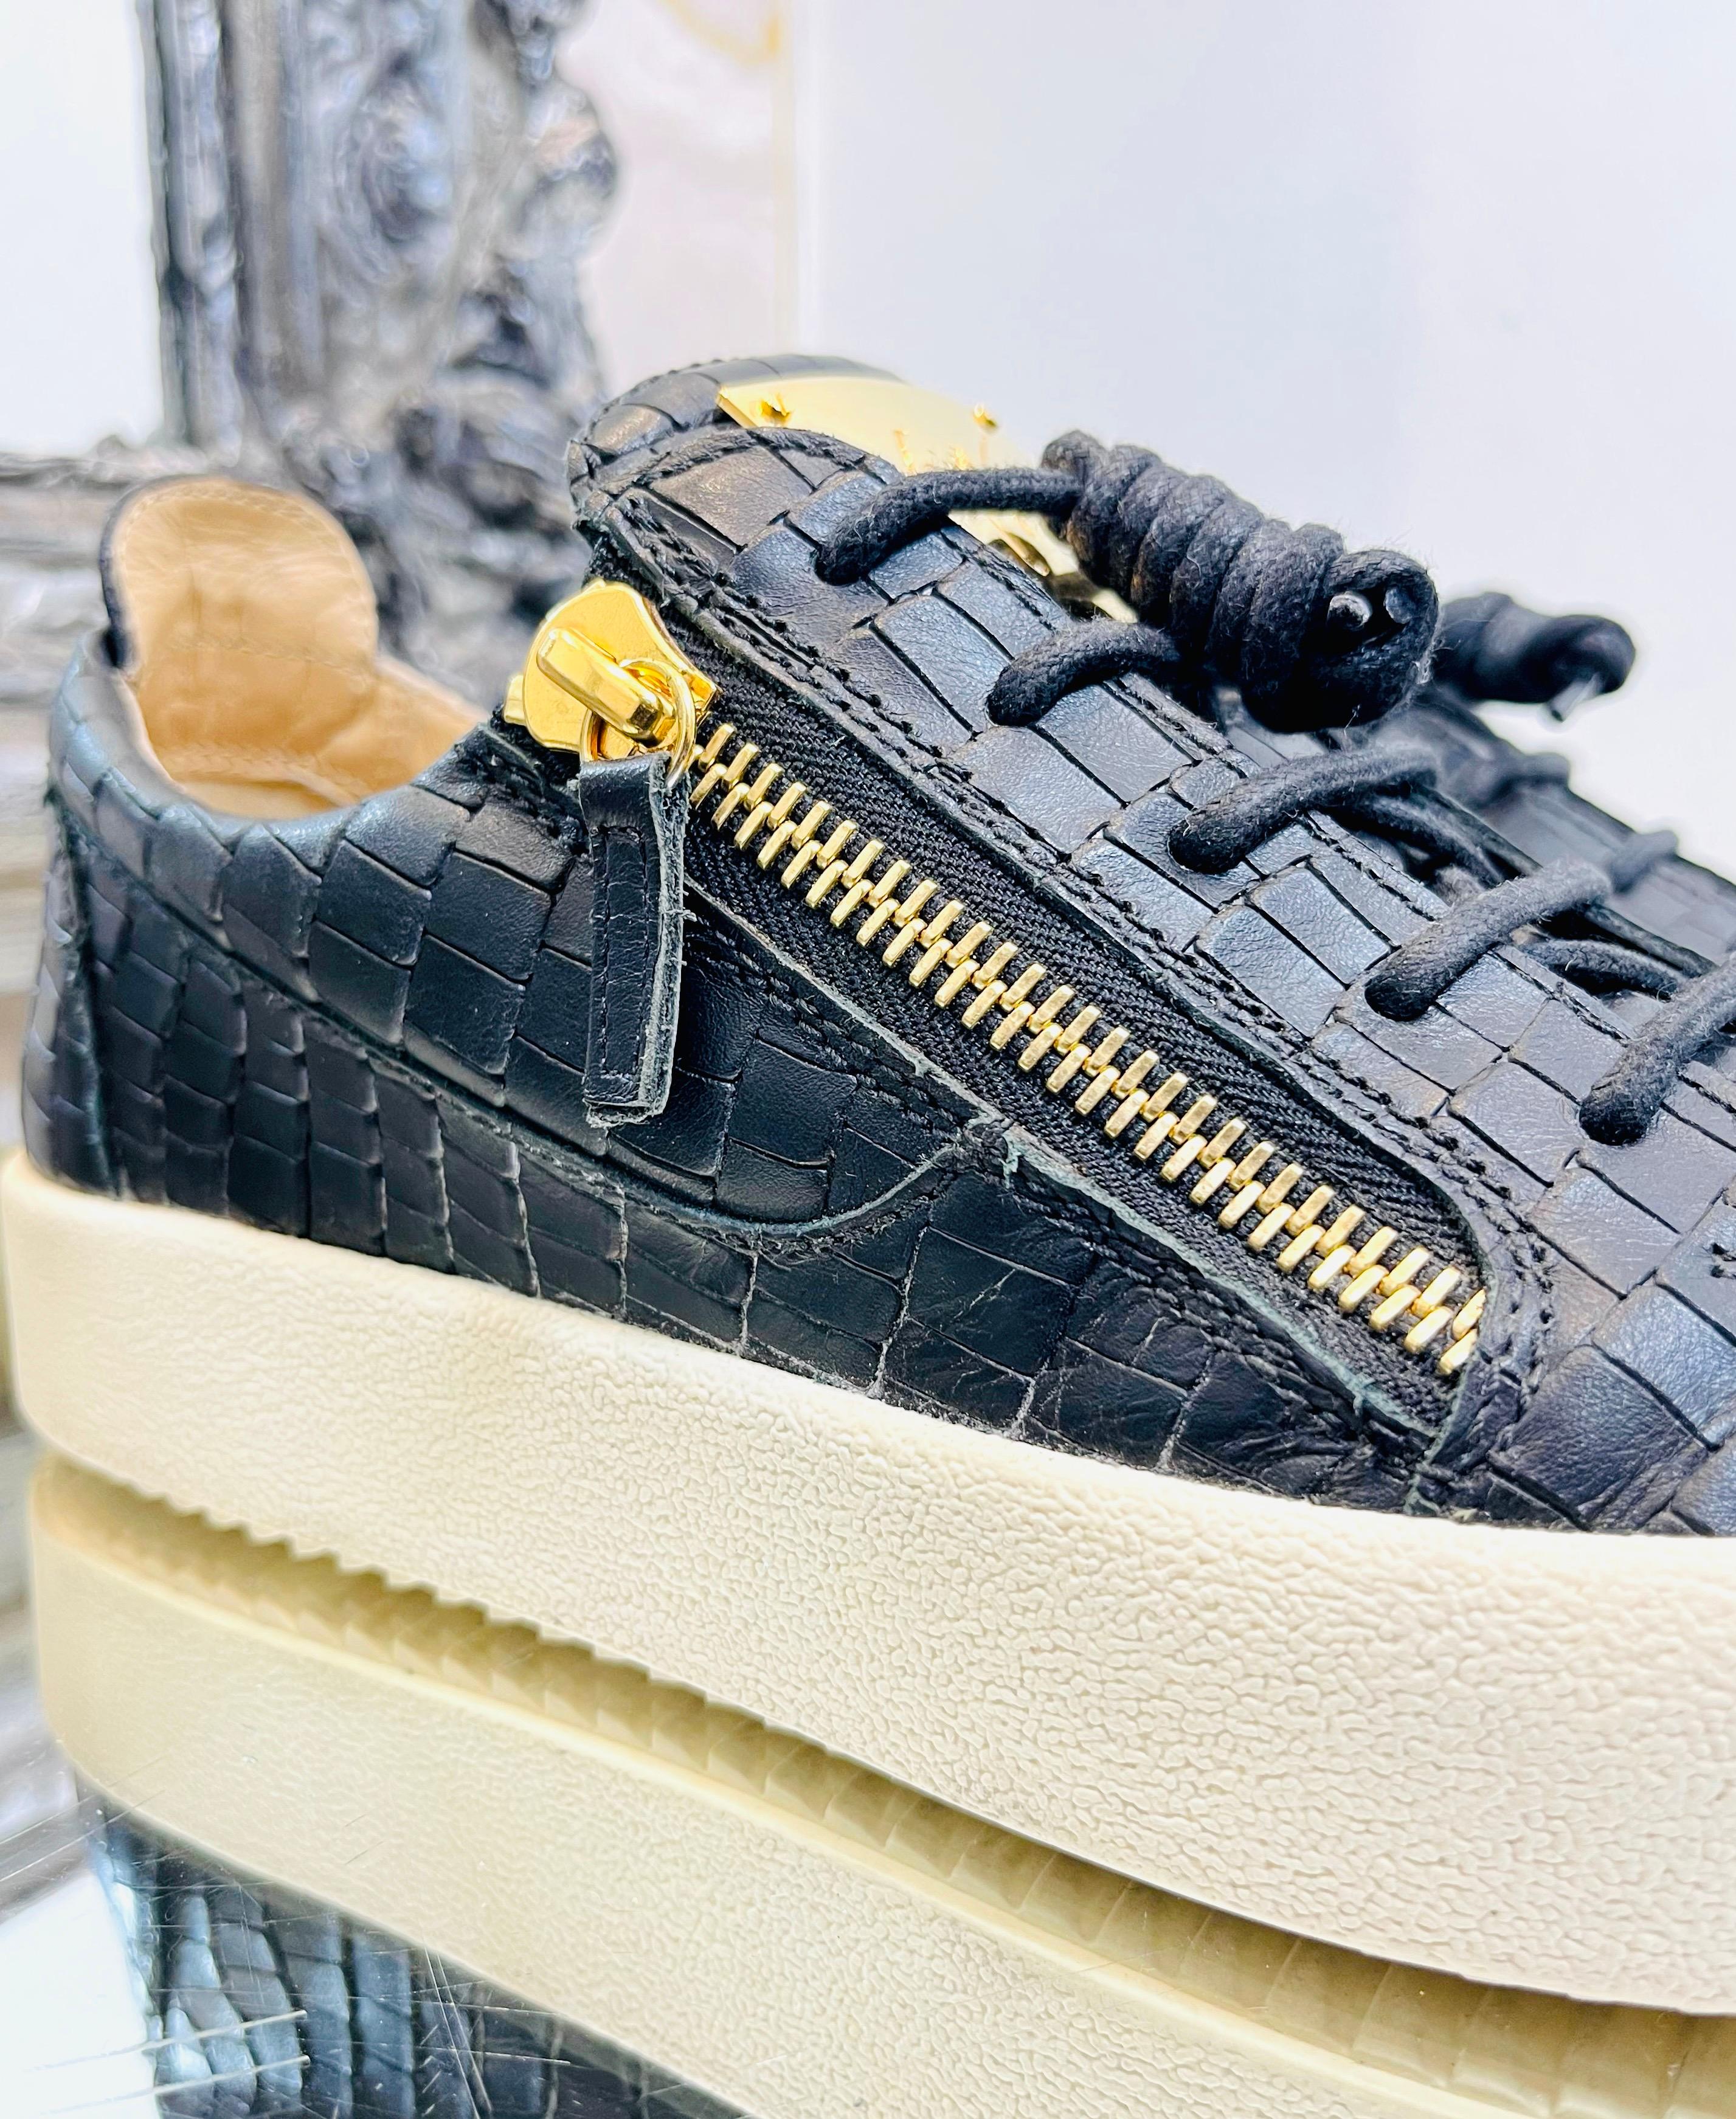 Giuseppe Zanotti Croc Embossed Leather Sneakers In Good Condition For Sale In London, GB